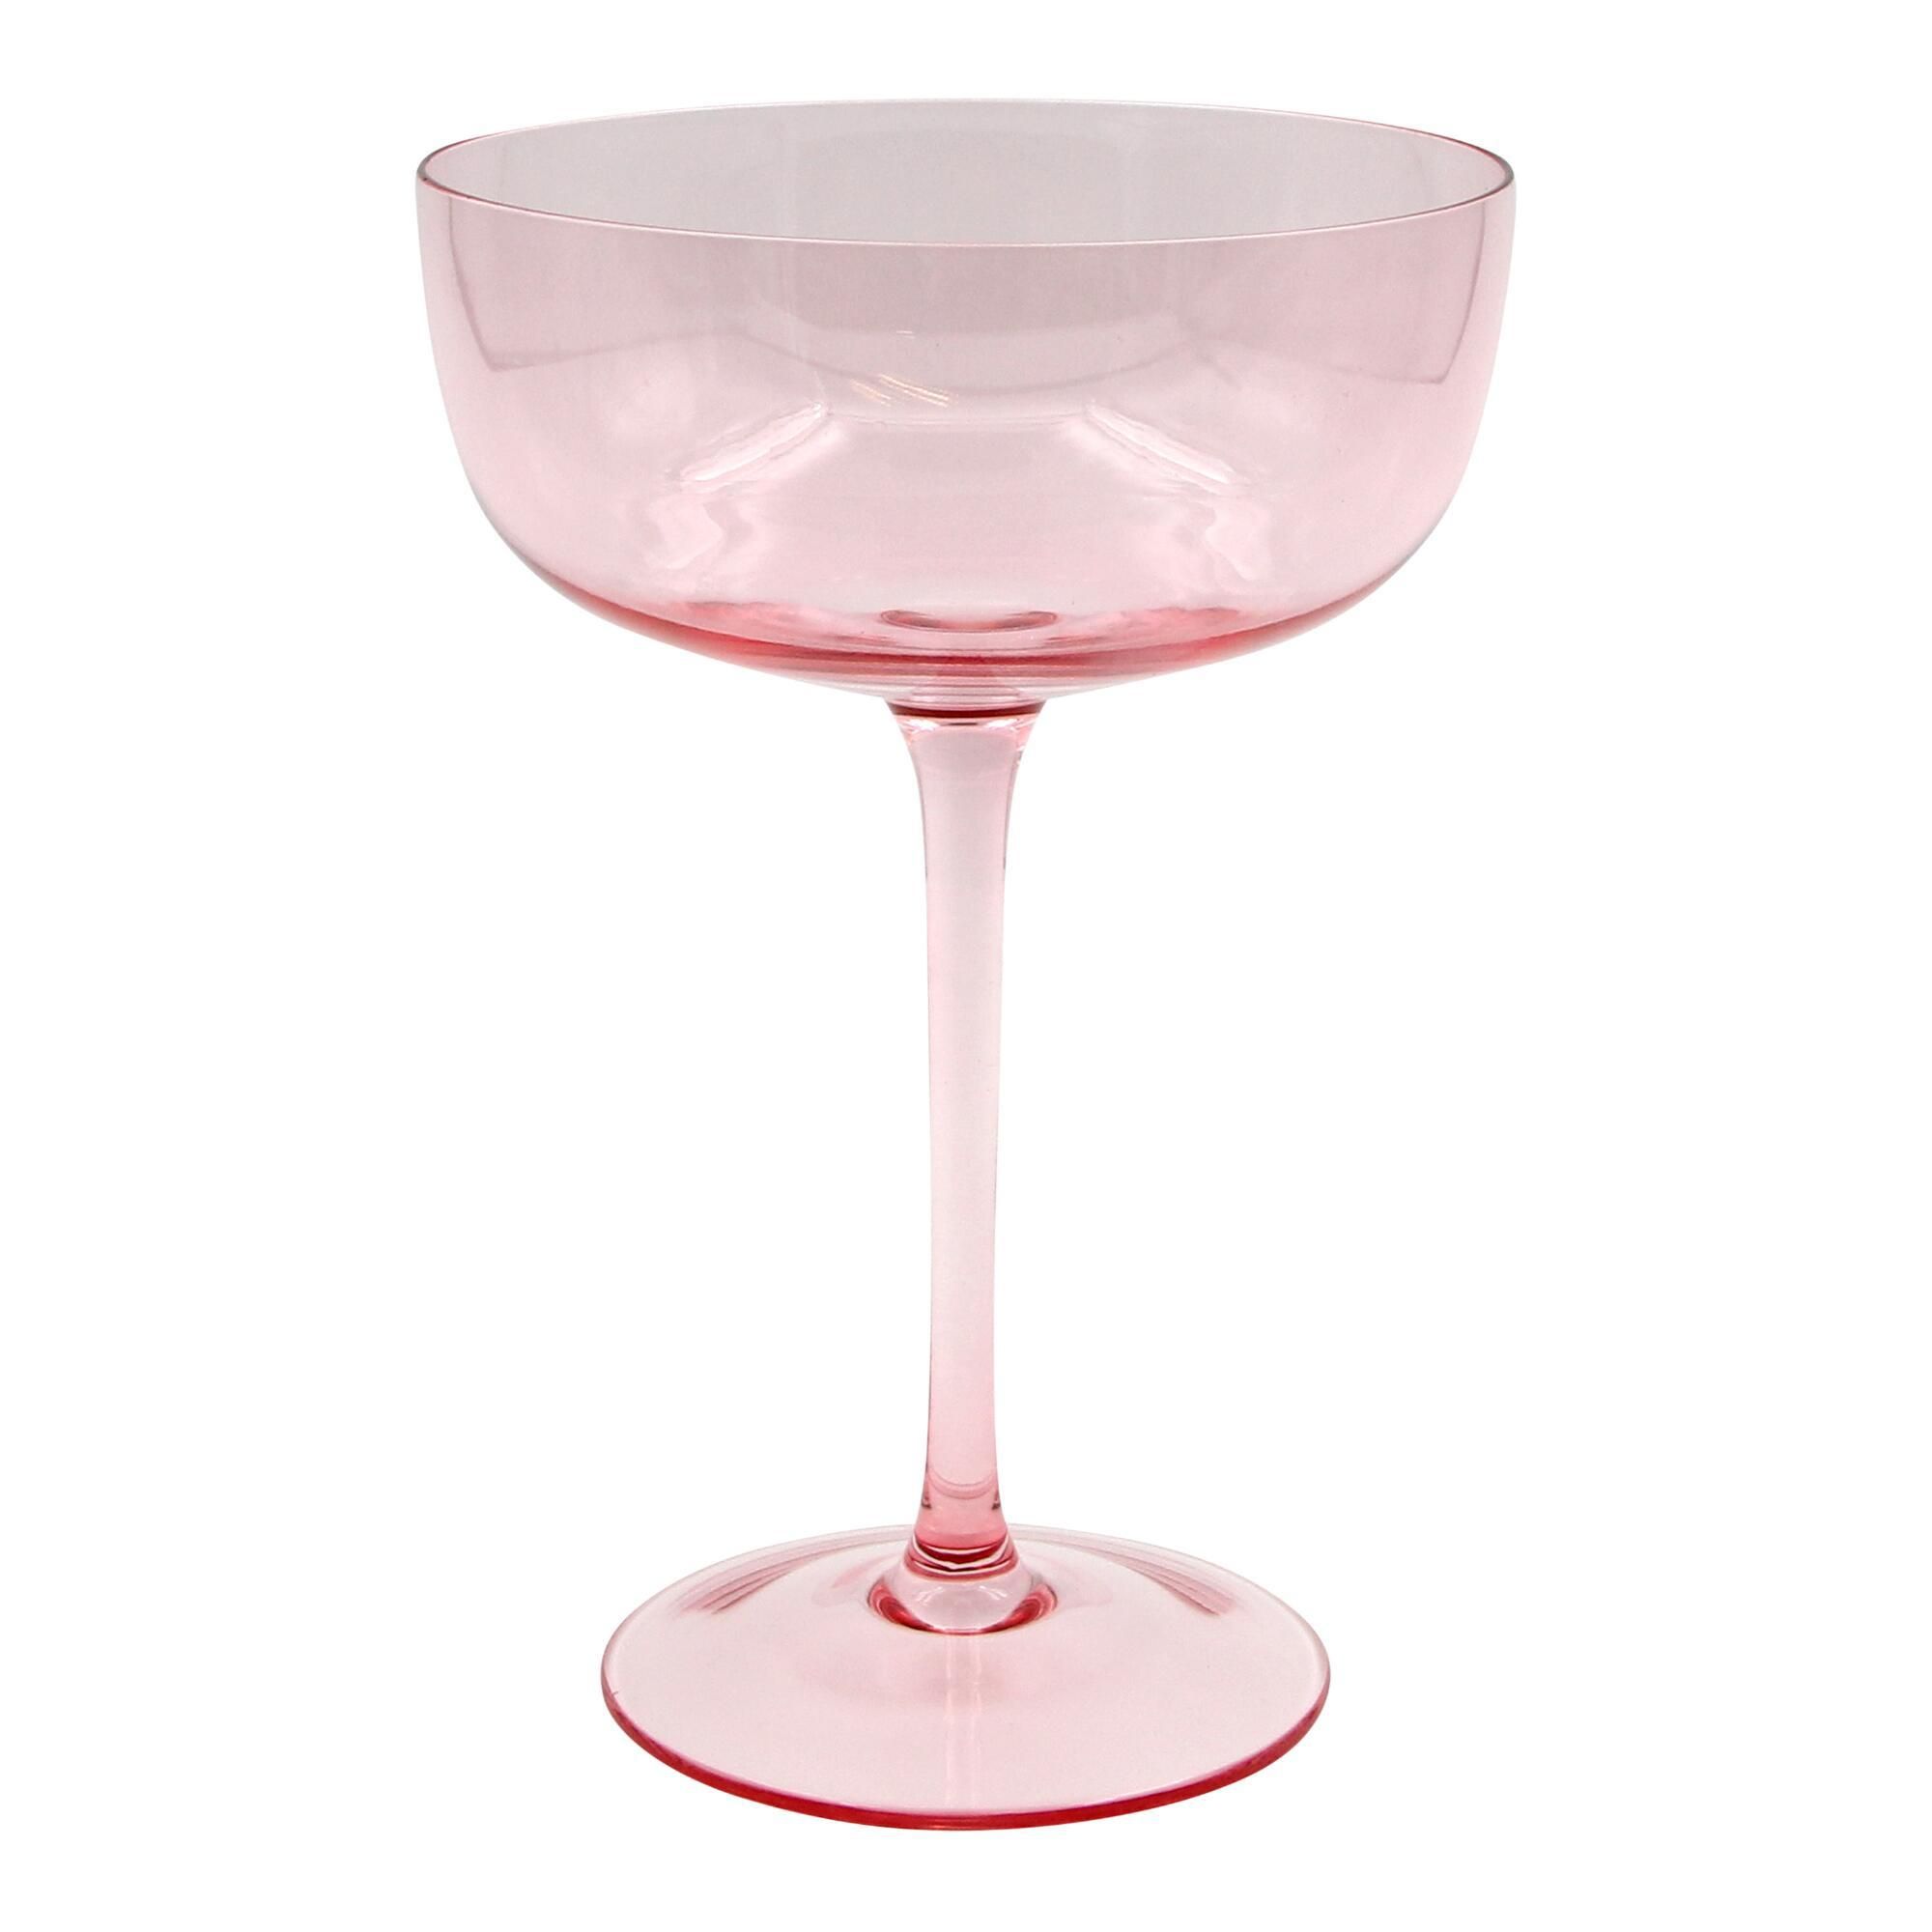 Pretty Wine Glasses: West Elm Esme Glassware, The Best Home Items to Shop  on Sale This Weekend, Because Why Not?